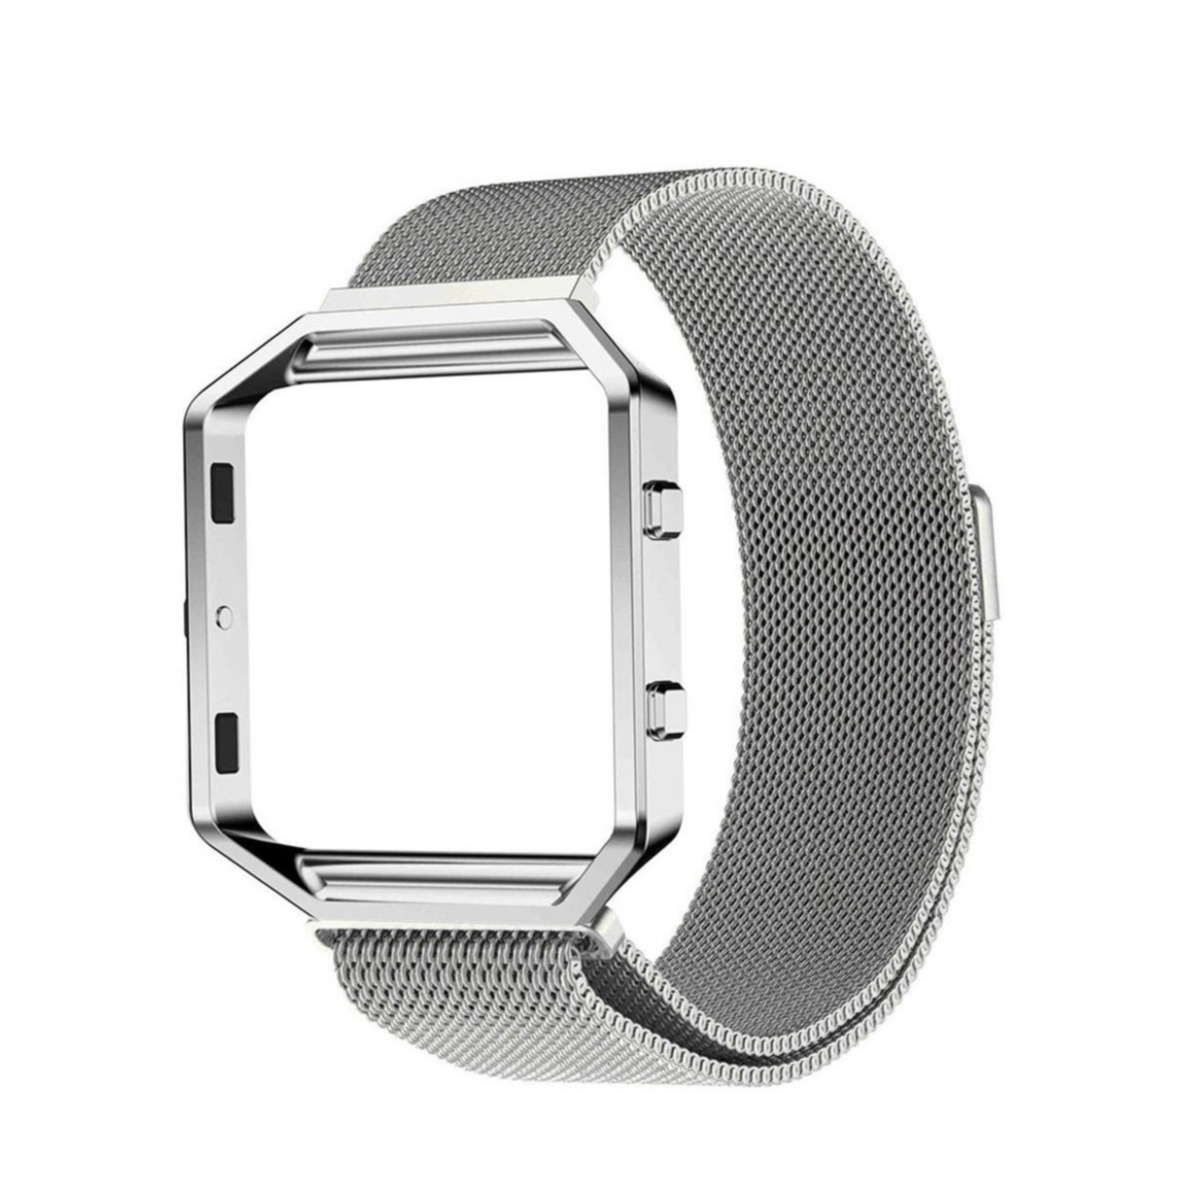 Image of 2in1 Fitbit Blaze Edelstahl Armband Milanaise + Alu Bumper Case - Silber bei Apfelkiste.ch